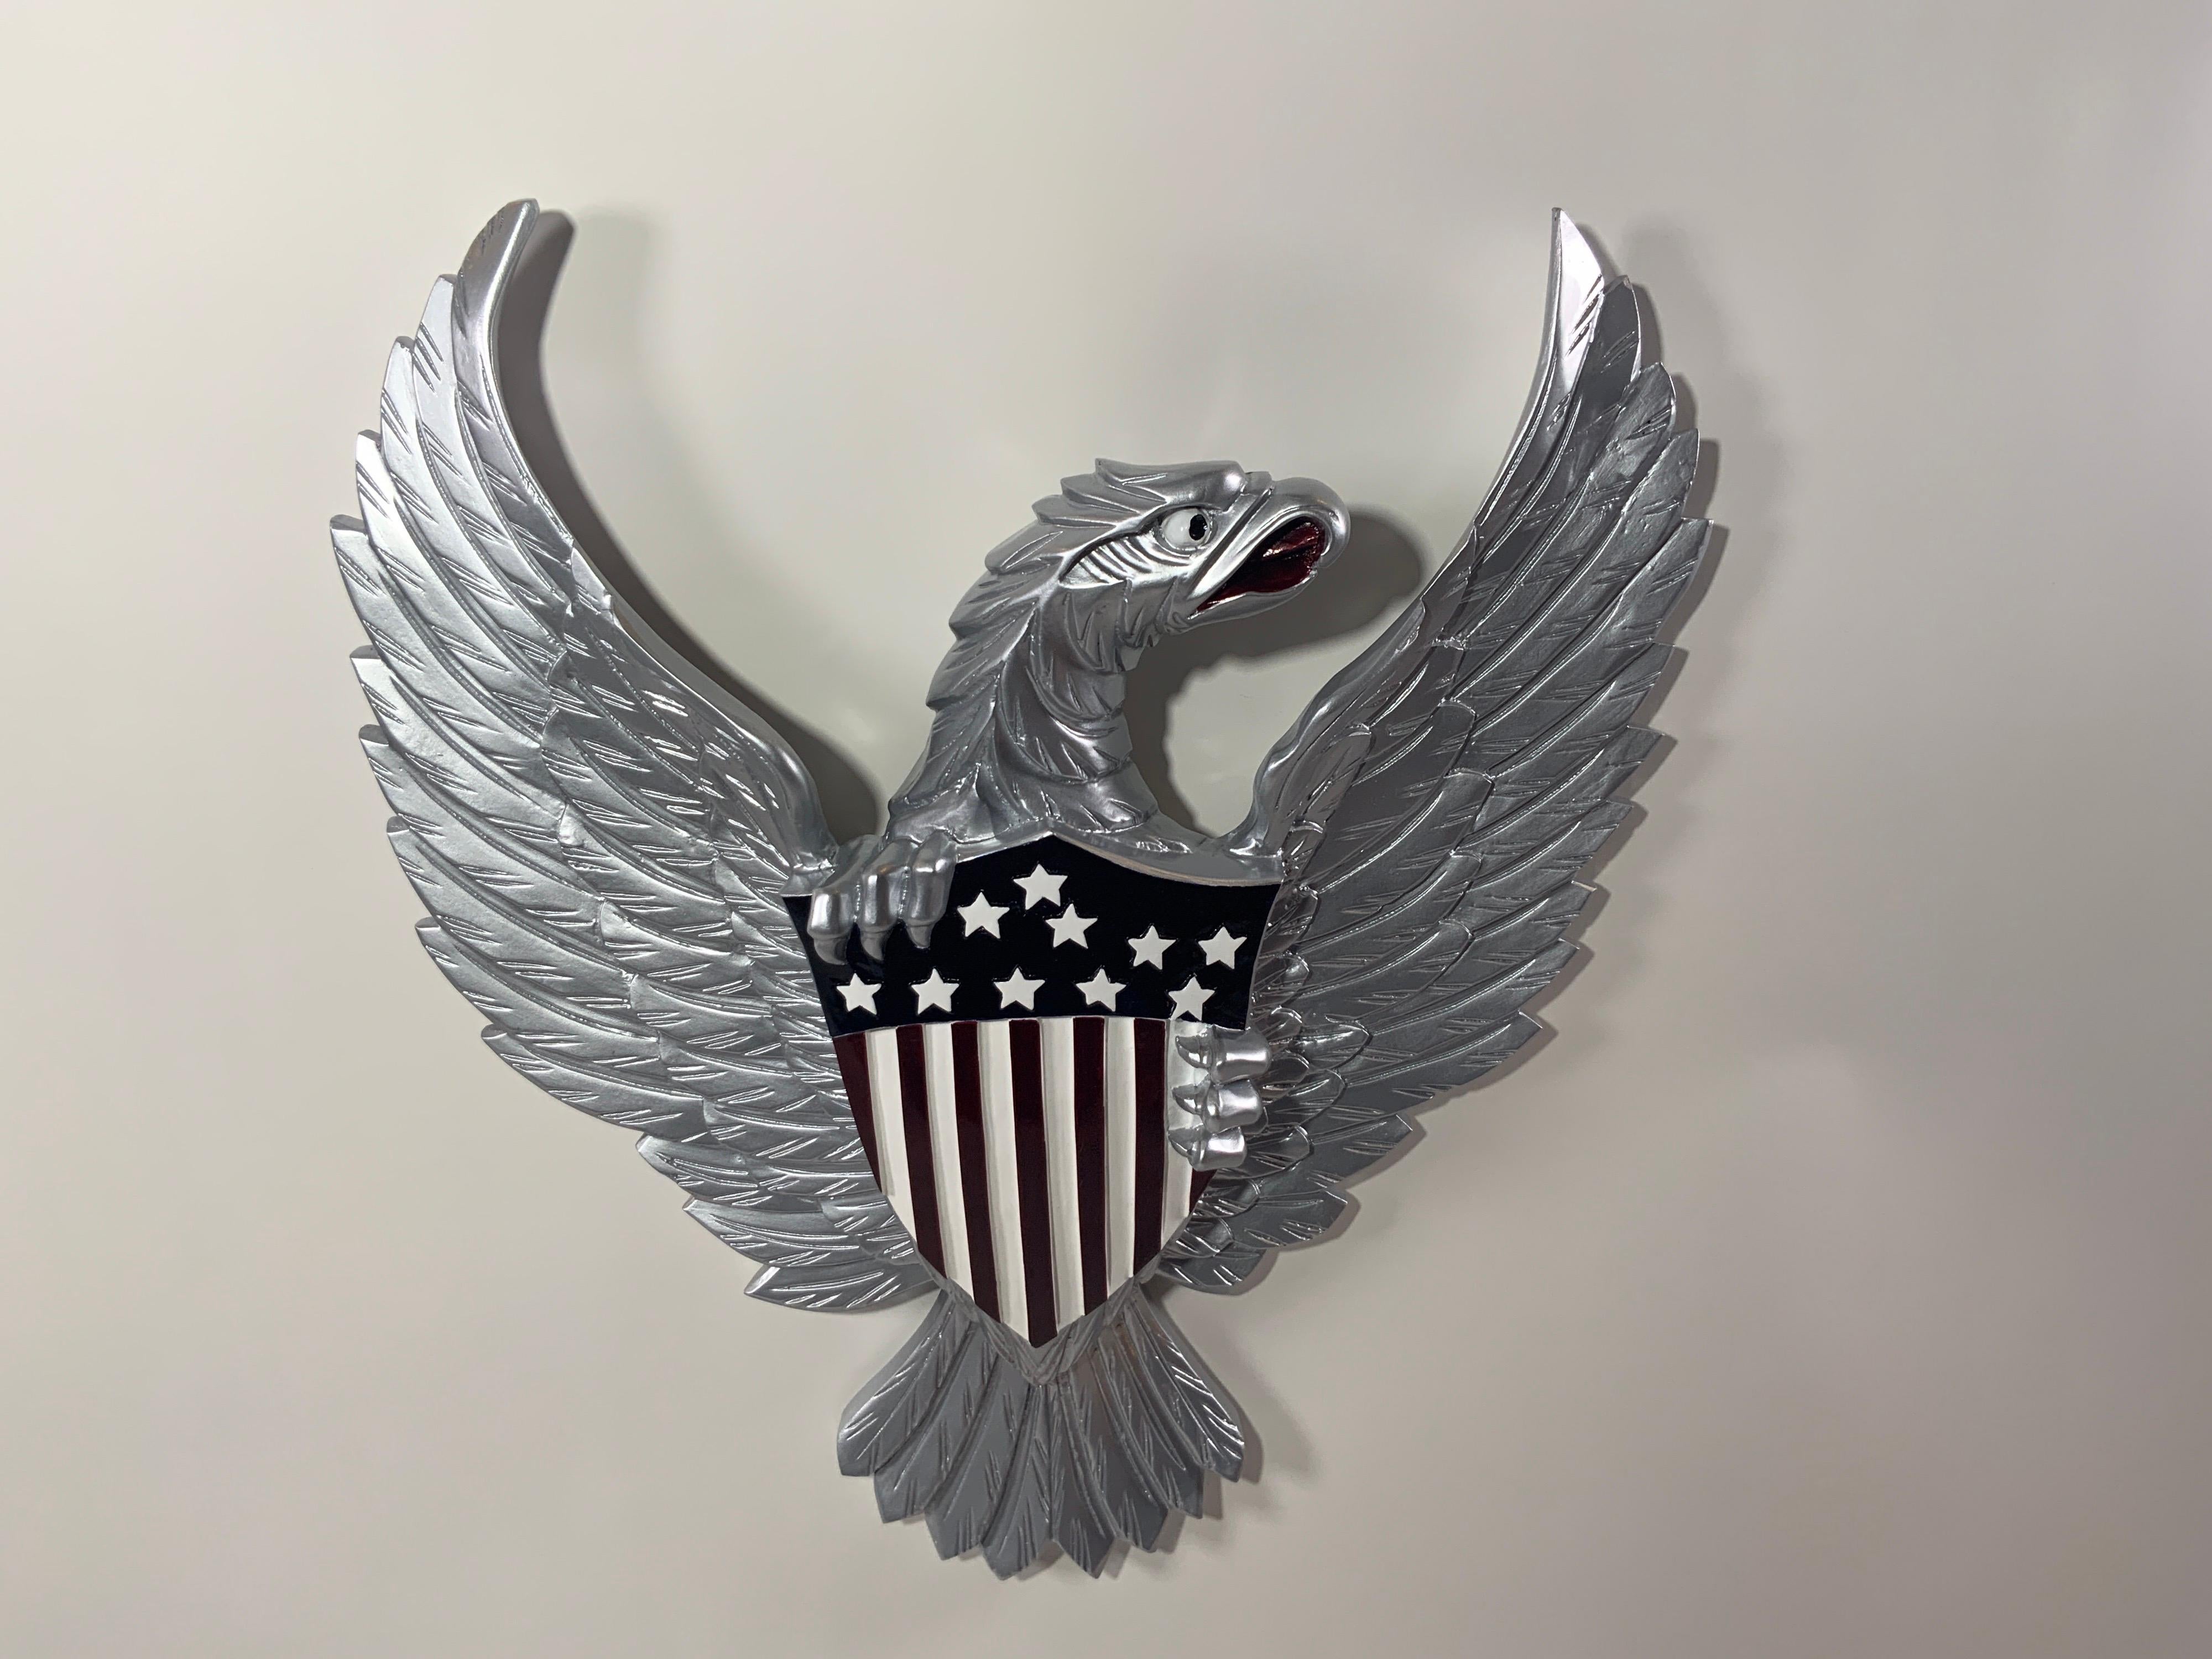 Carved wooden eagle painted with a bright silver finish. Eagle is very detailed and clutching the Great Seal in the likeness of the US Coat of Arms. Rear hanging wire.

Overall dimensions: 21